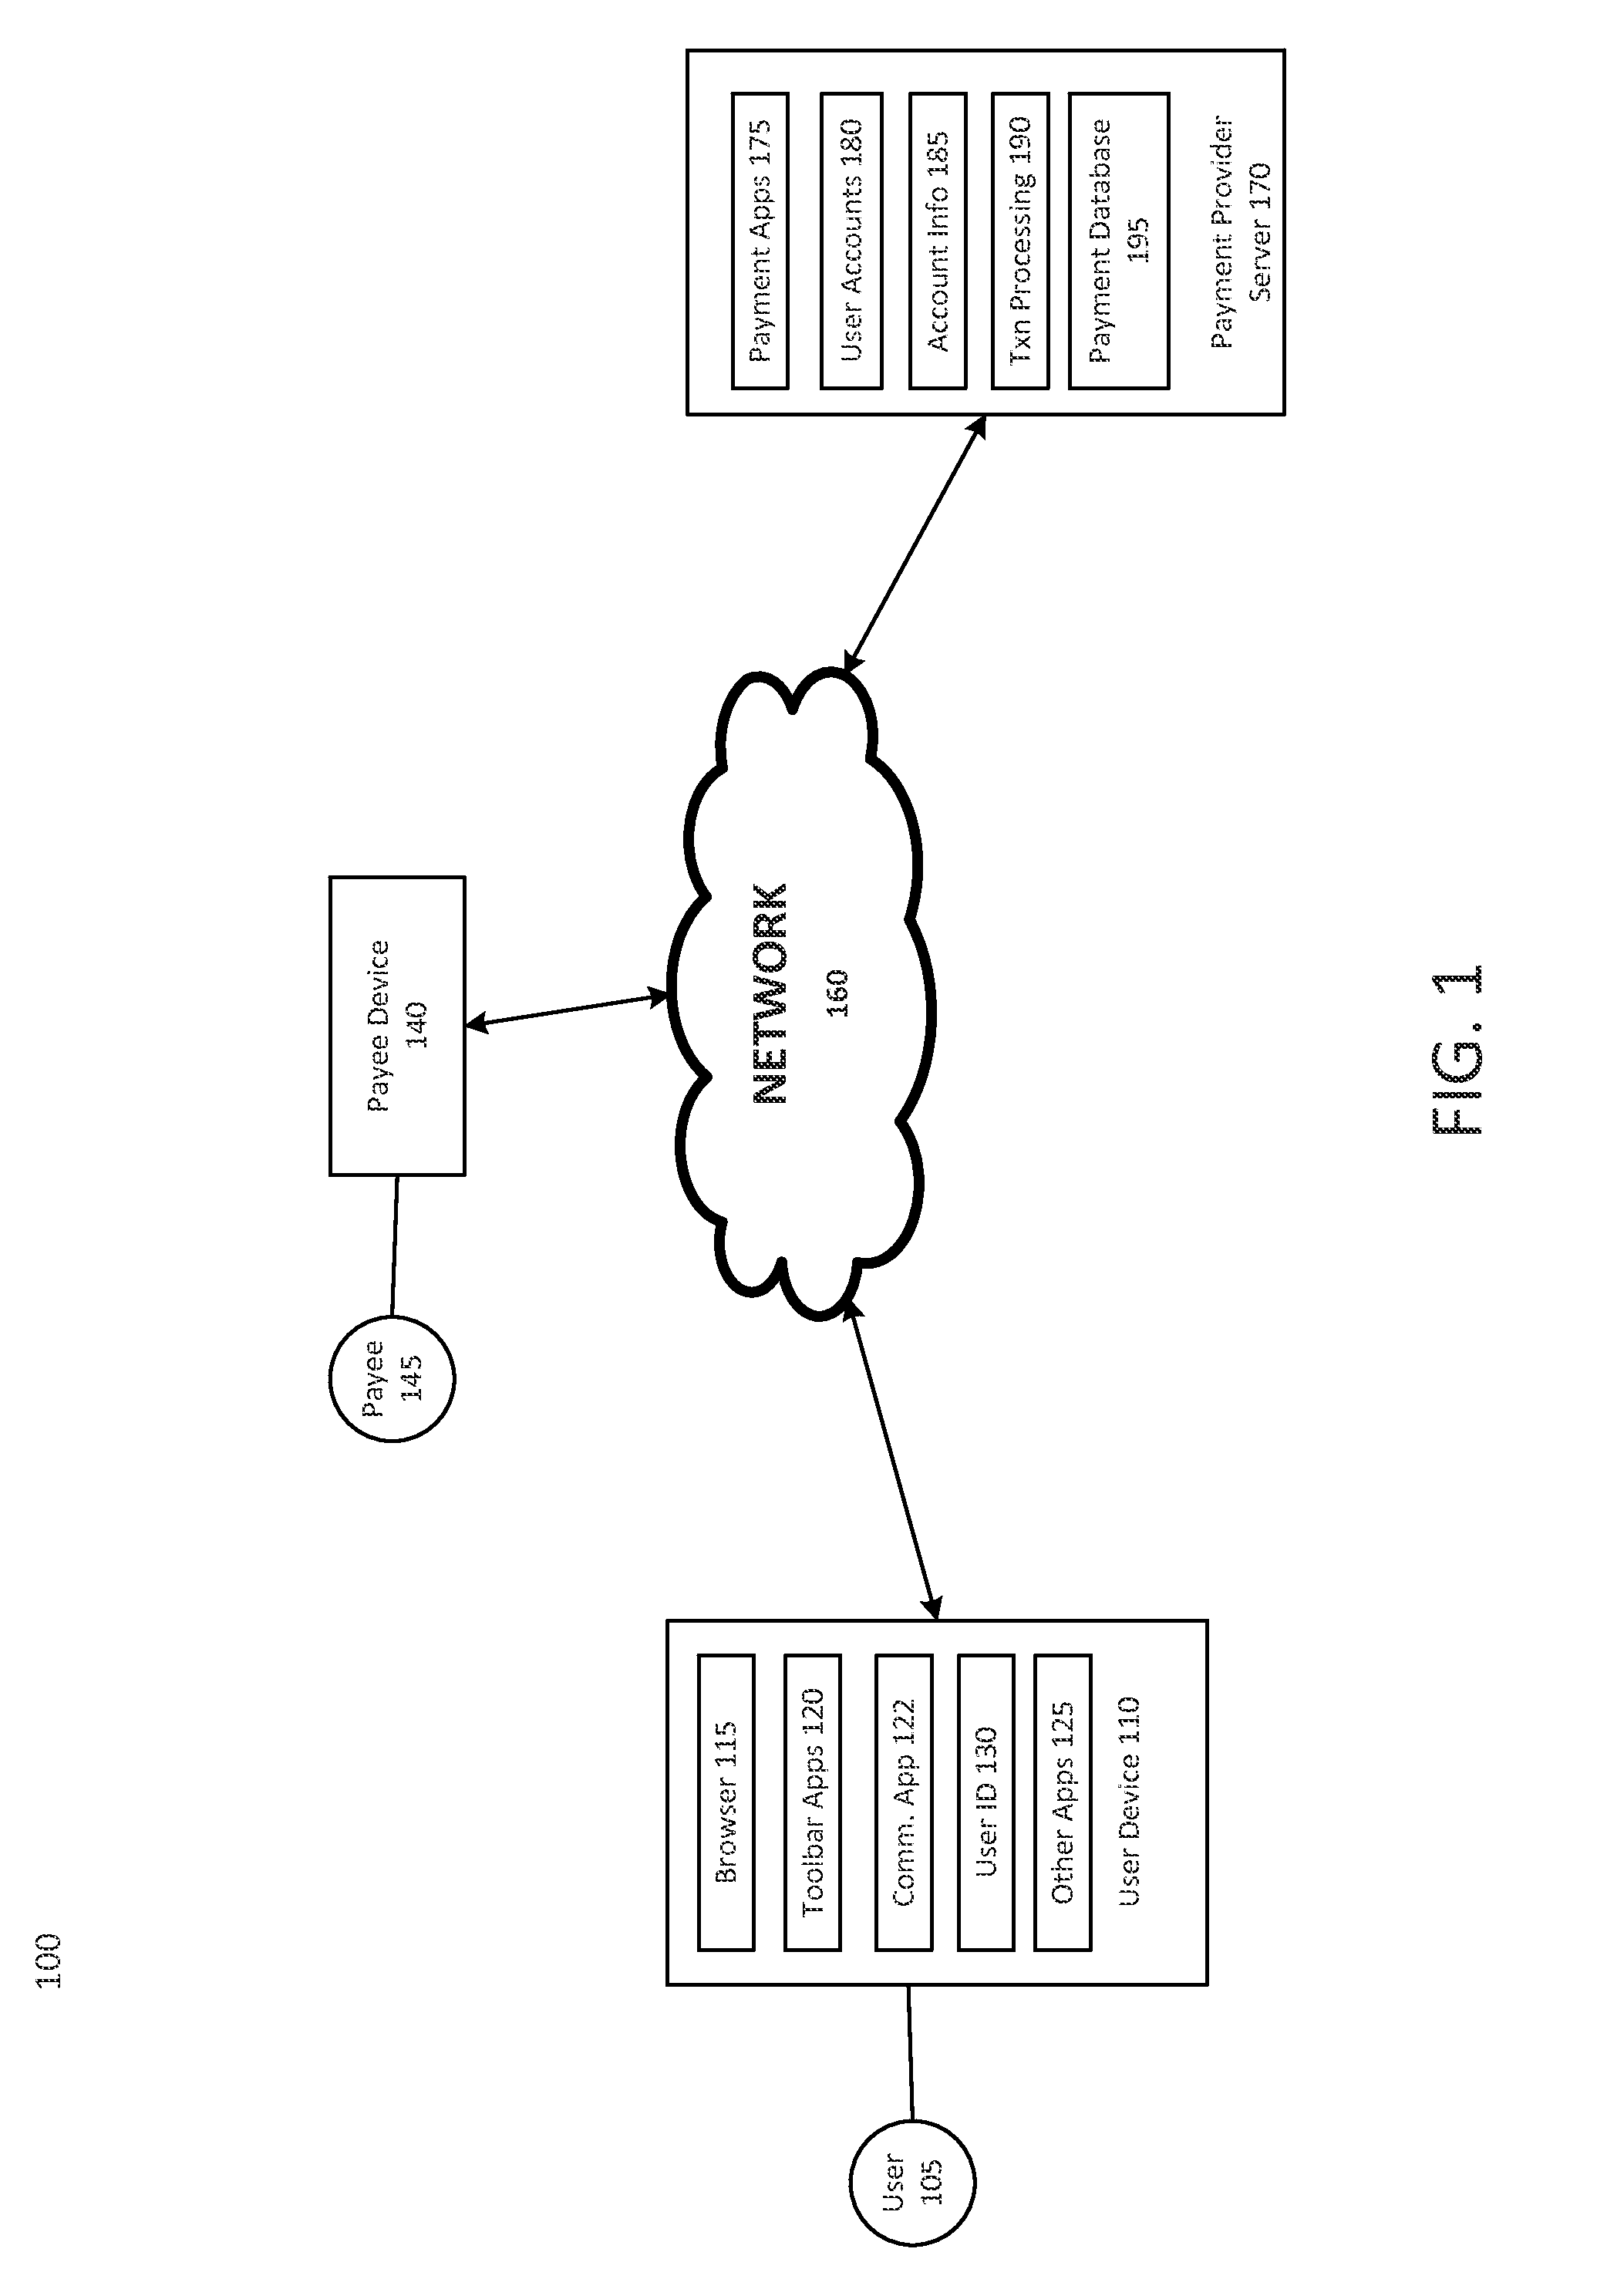 Systems and methods for implementing transactions based on facial recognition